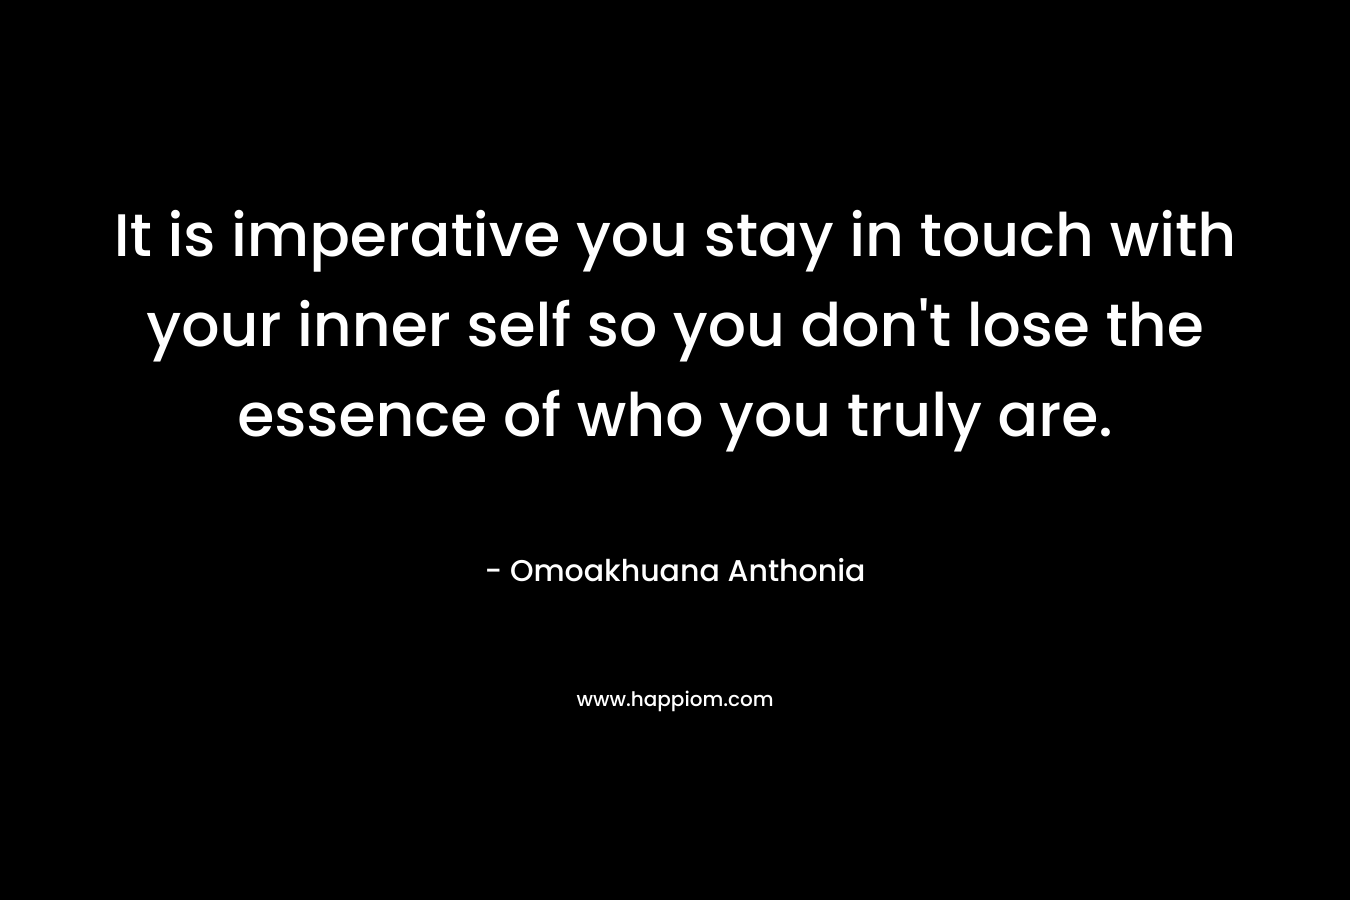 It is imperative you stay in touch with your inner self so you don't lose the essence of who you truly are.